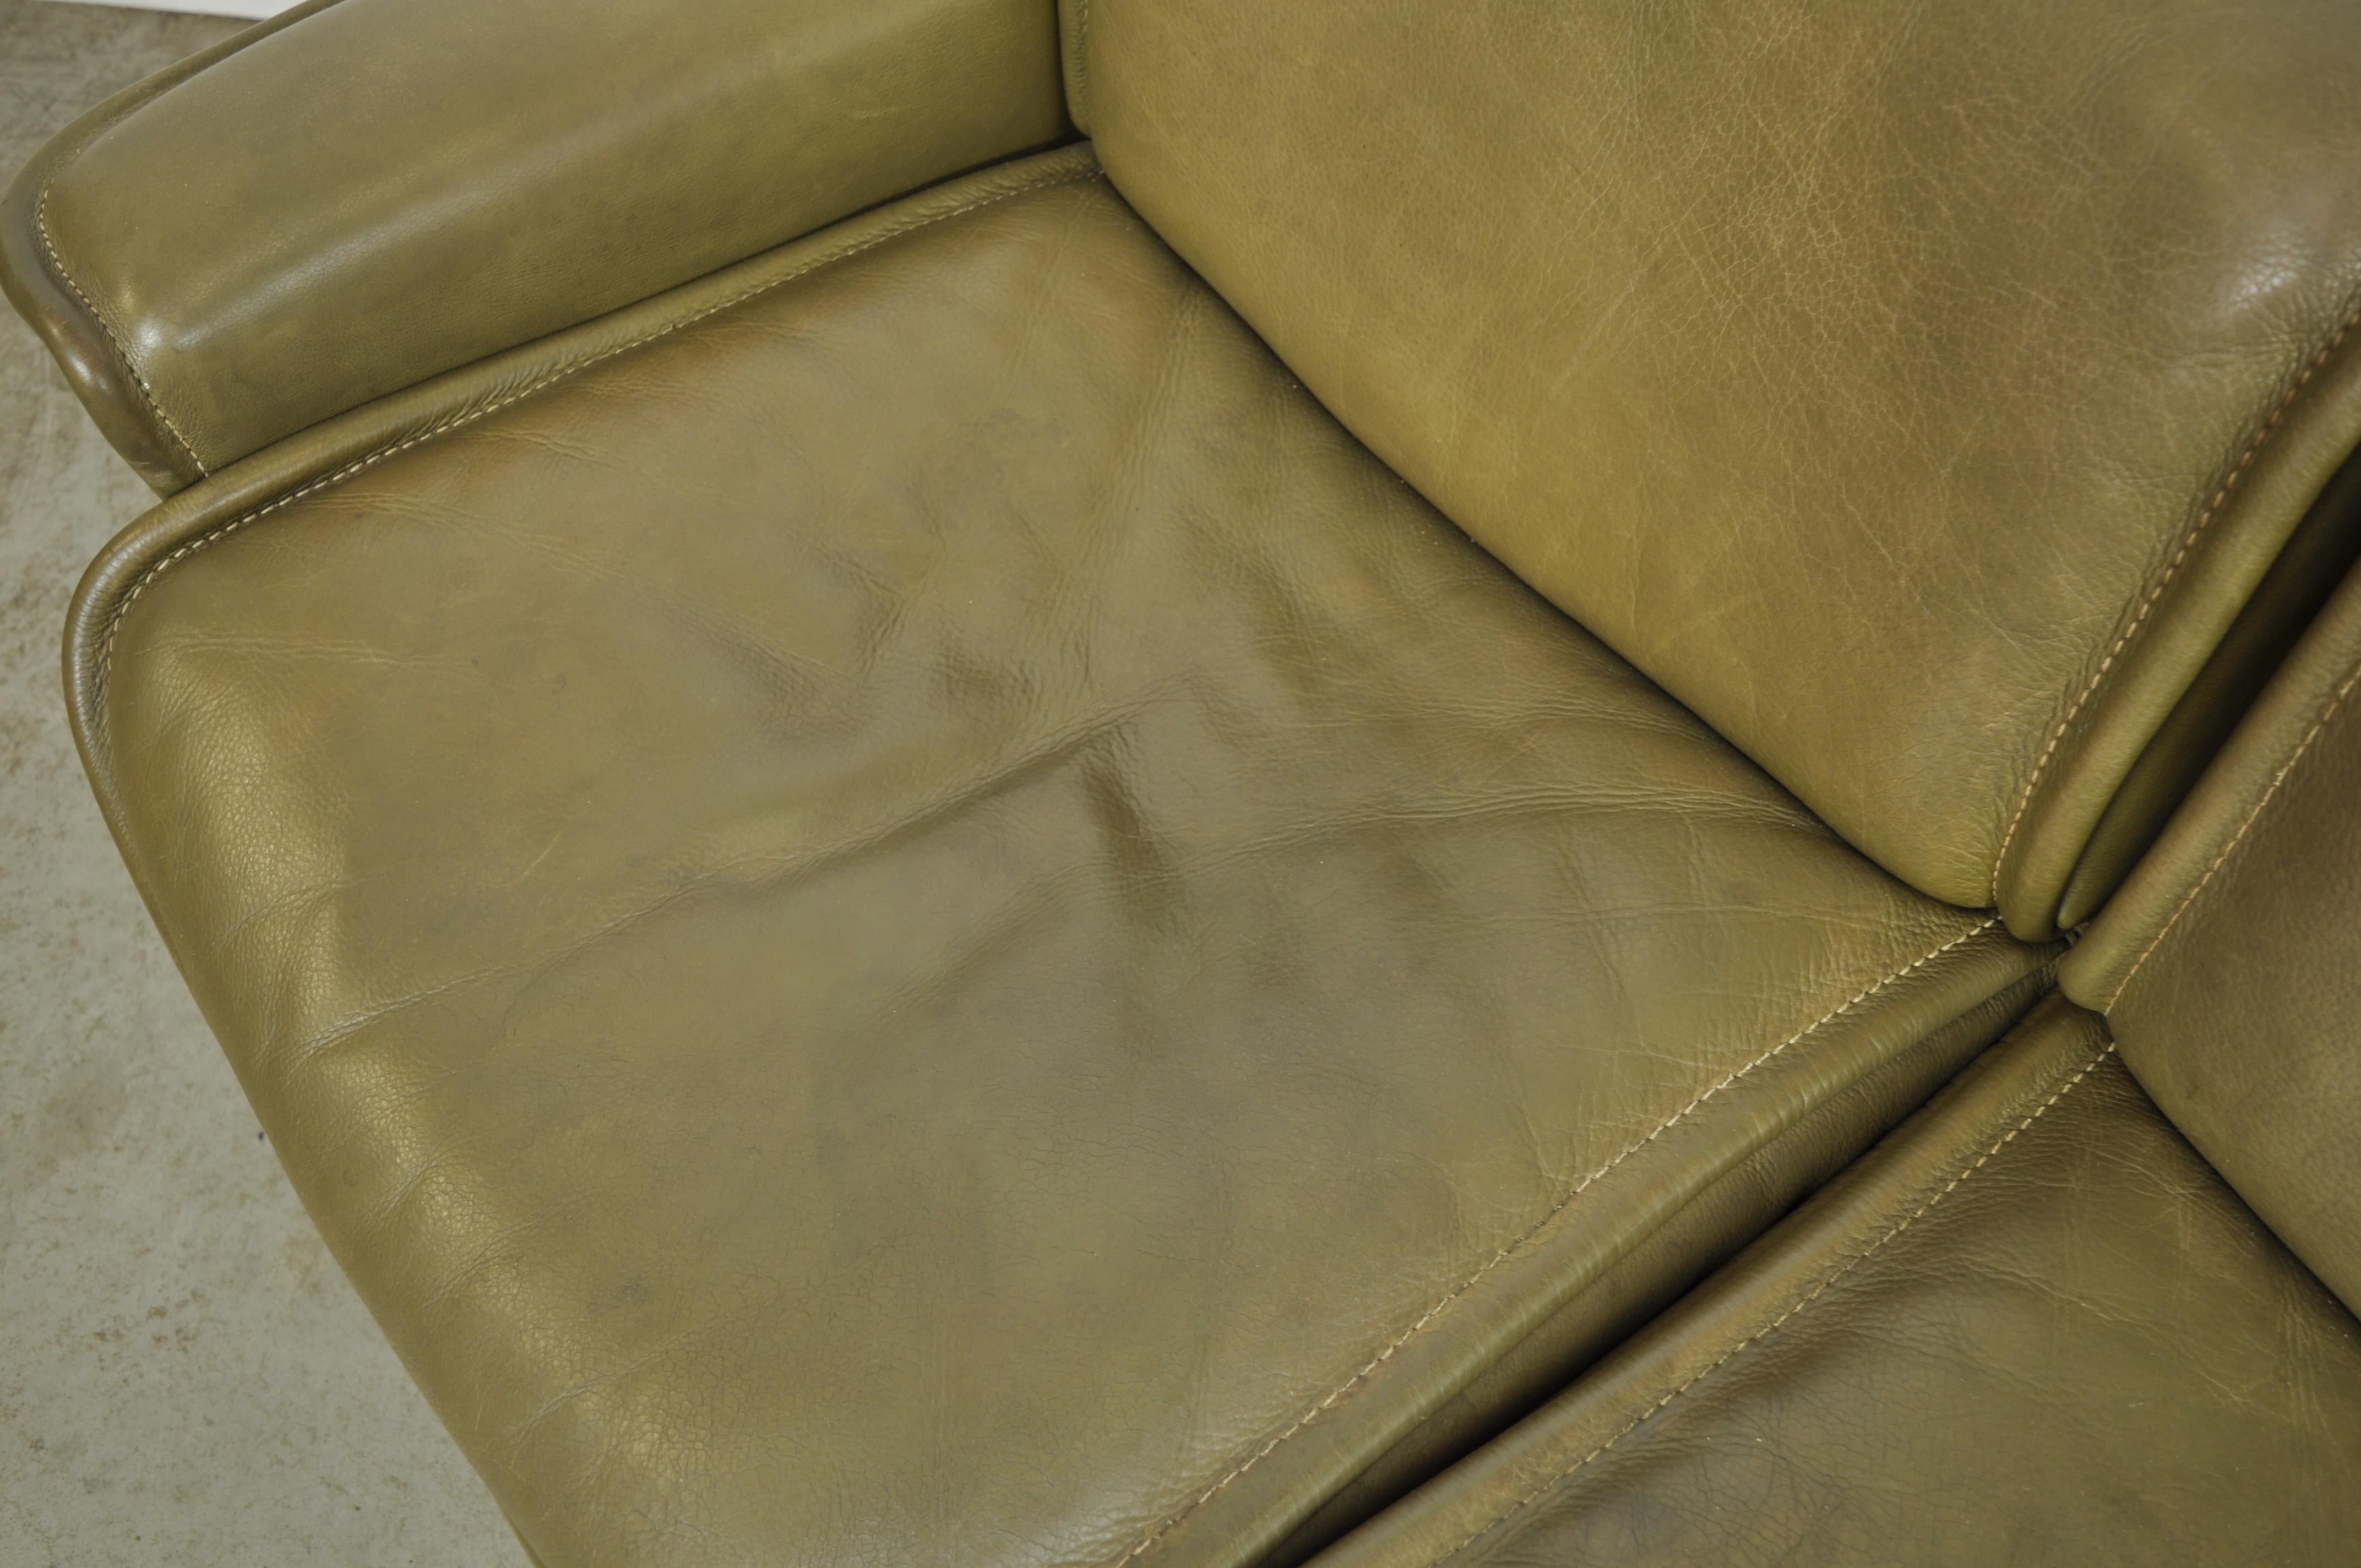 Olive Colored Leather 3-Seater Sofa, Model Ds-12 by De Sede, 1970s Switzerland For Sale 5